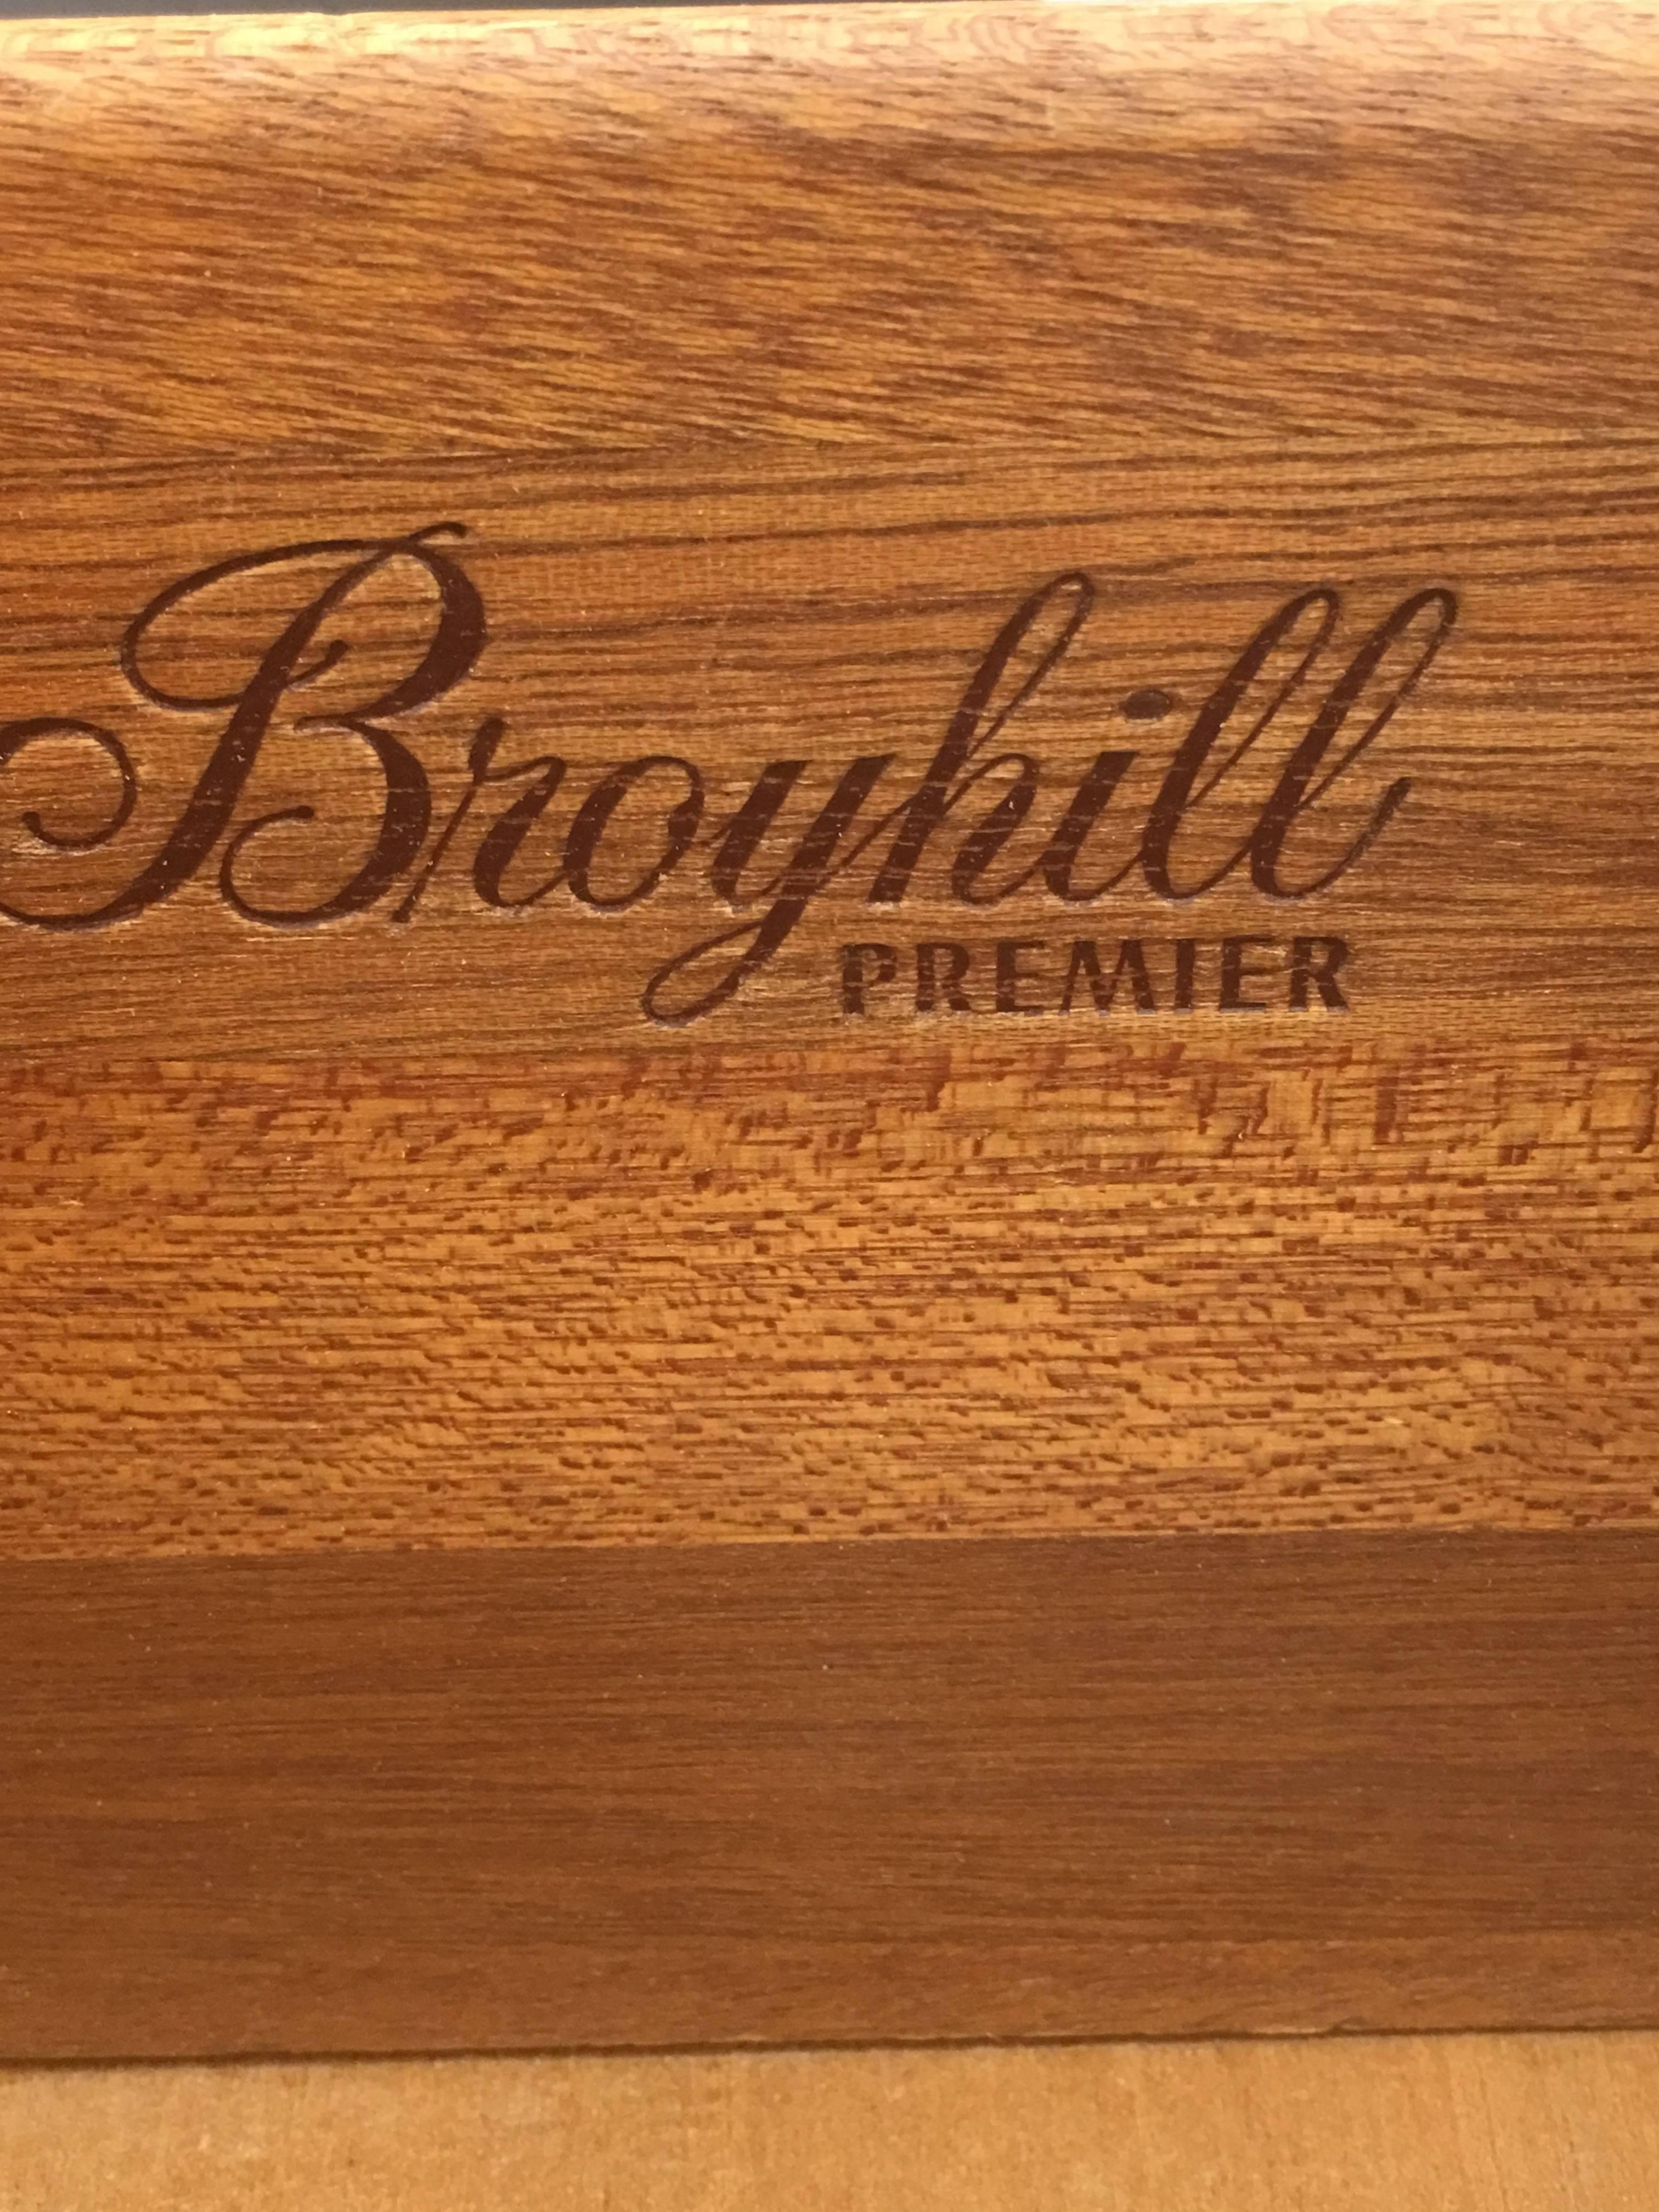 Produced in 1970 from Broyhill Premier, this uncommon low boy and mirror has a matching nightstand and also a double headboard if required. This dresser is produced to uncompromising standards featuring steel drawer slides, solid steel handles with